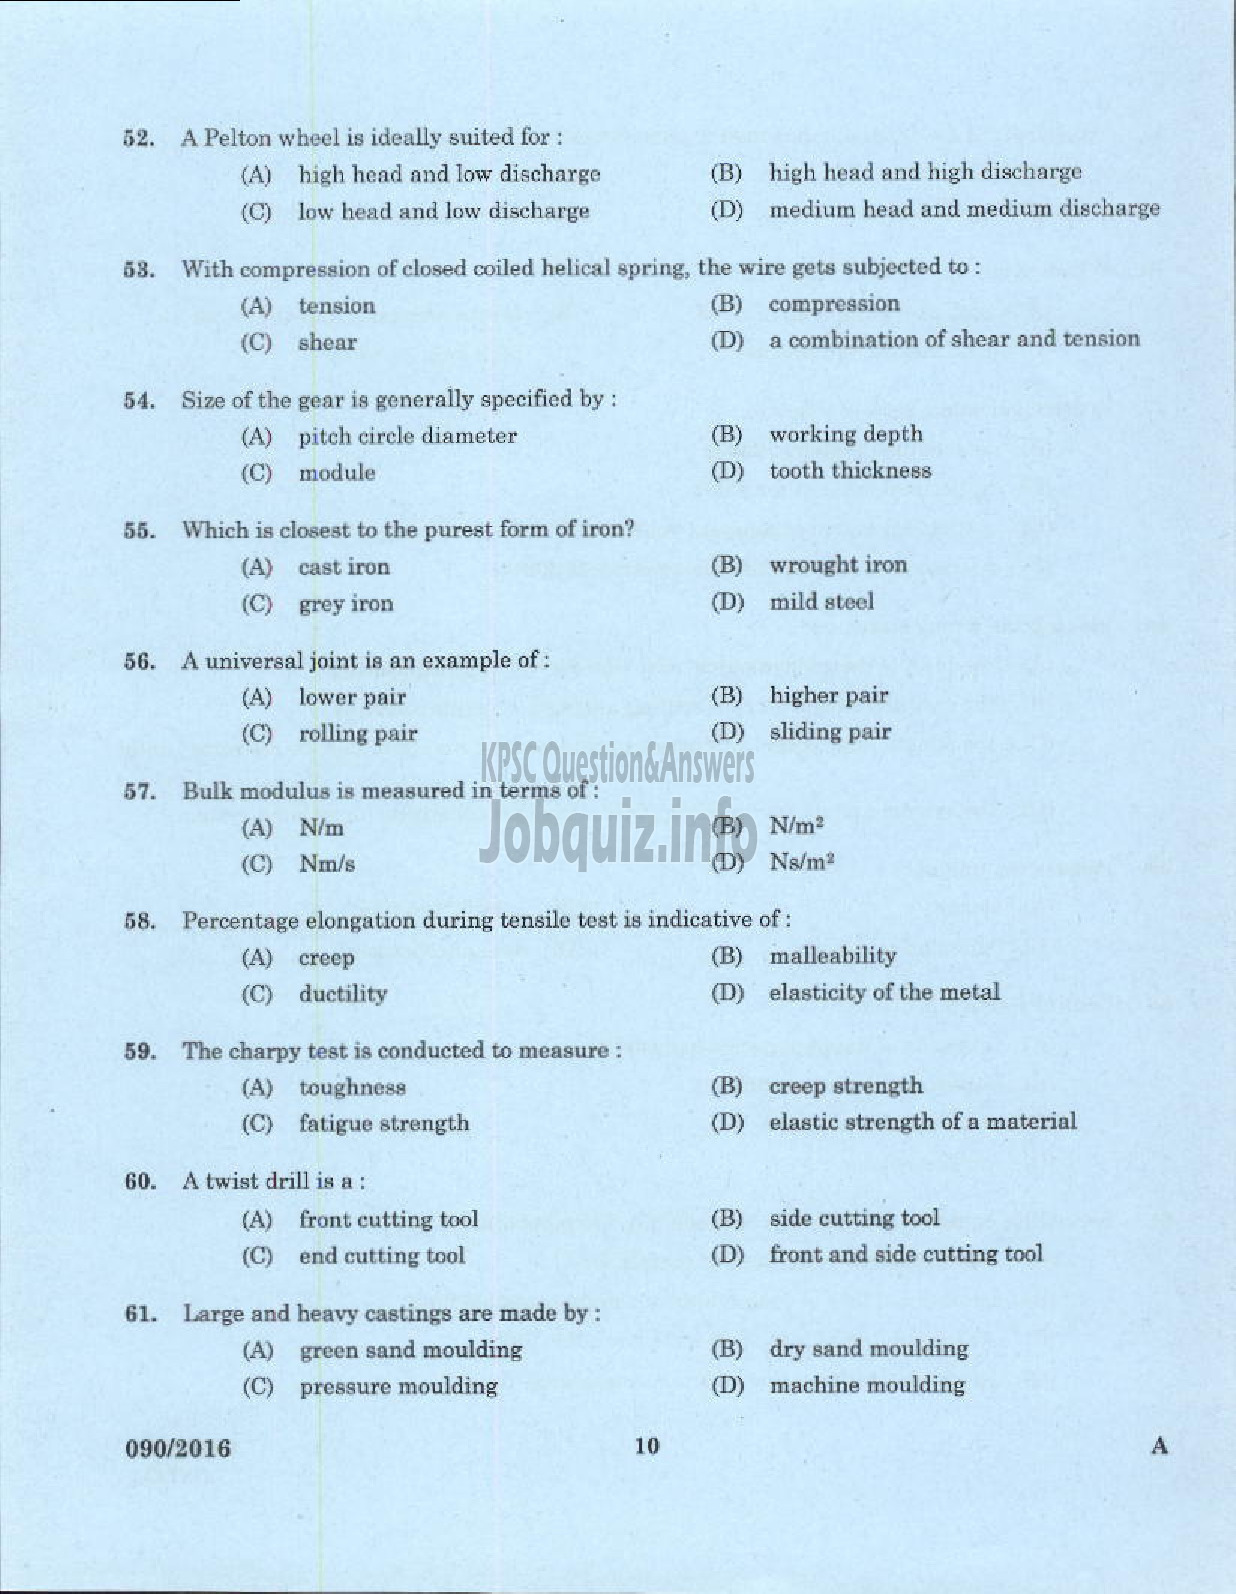 Kerala PSC Question Paper - VOCATIONAL INSTRUCTOR IN REFRIGERATION AND AIR CONDITIONING VHSE-8